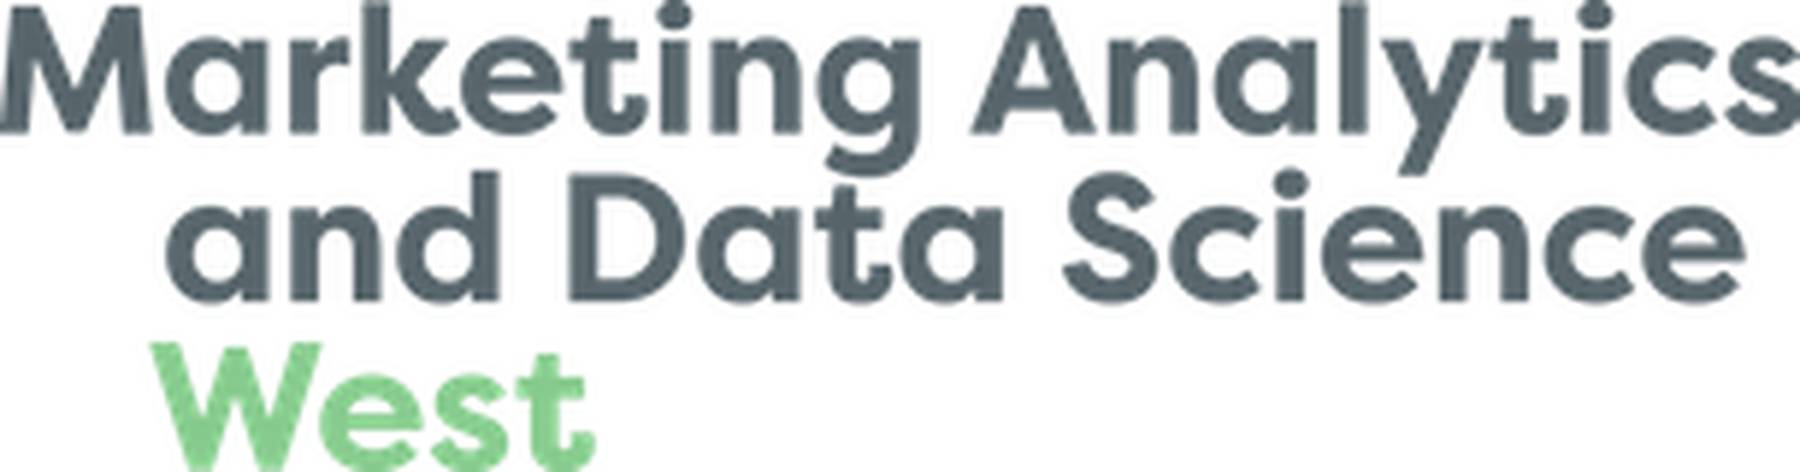 Marketing Analytics and Data Science West 2020